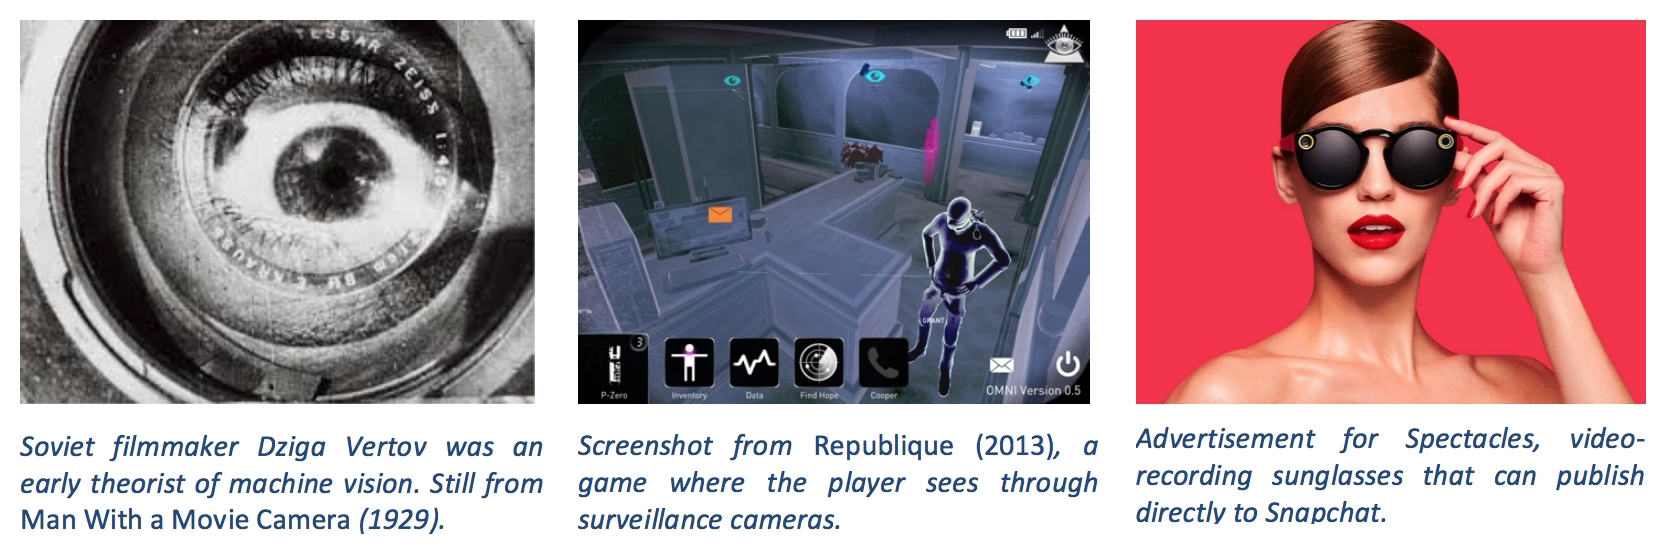 Three images showing examples of machine vision: Vertov's kinoeye, a game that simulates surveillance, Spectacles for Snapchat.